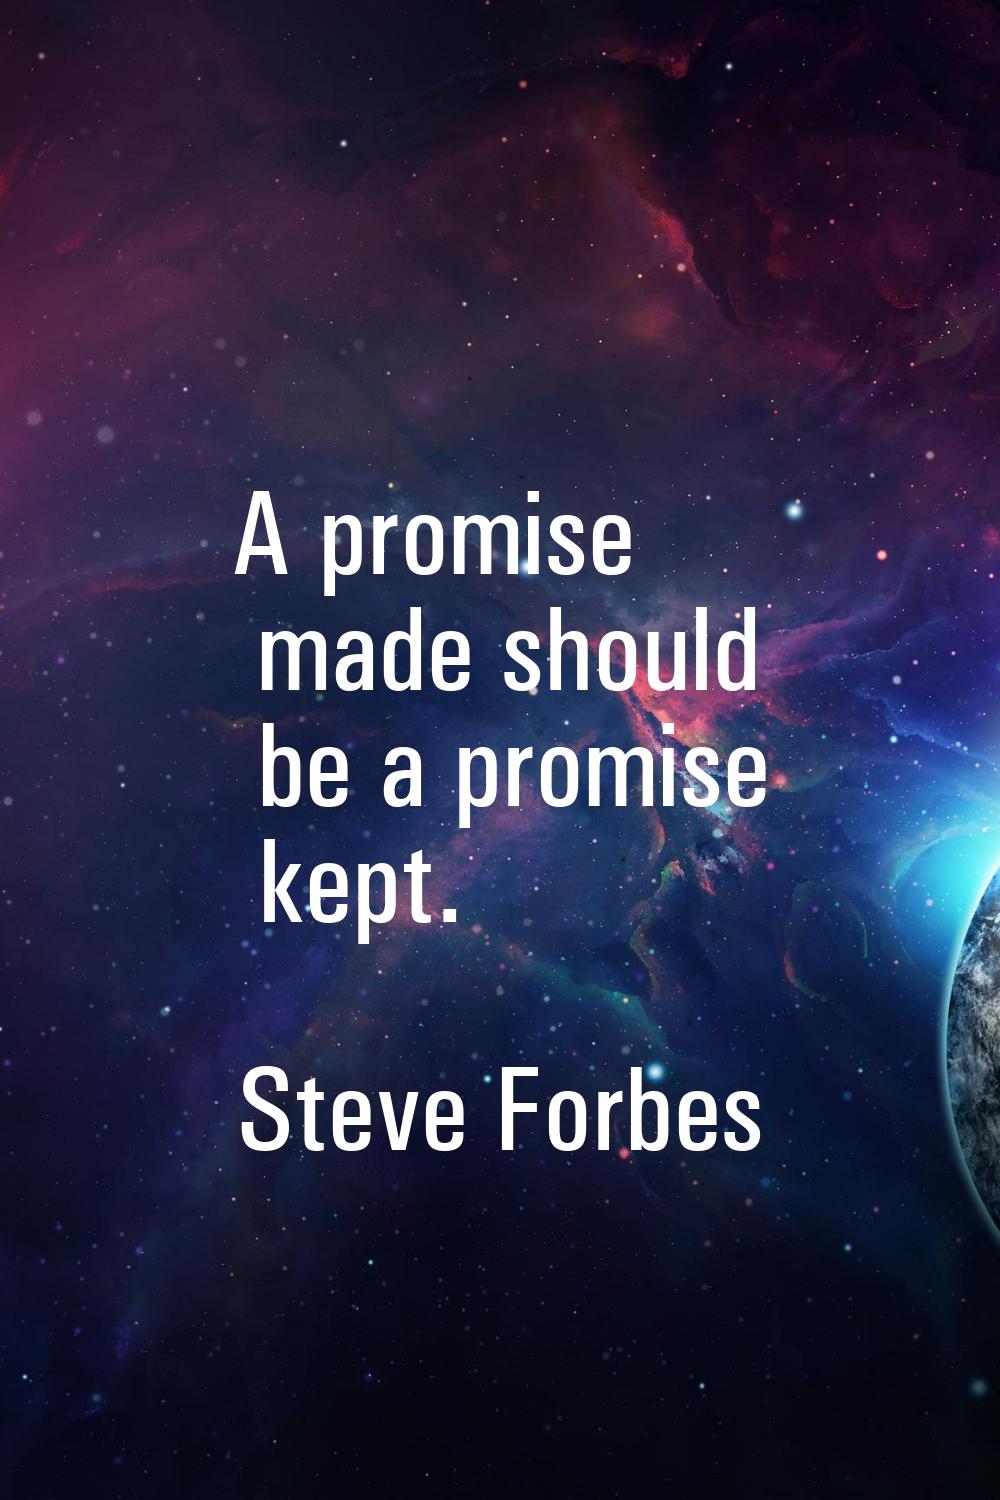 A promise made should be a promise kept.